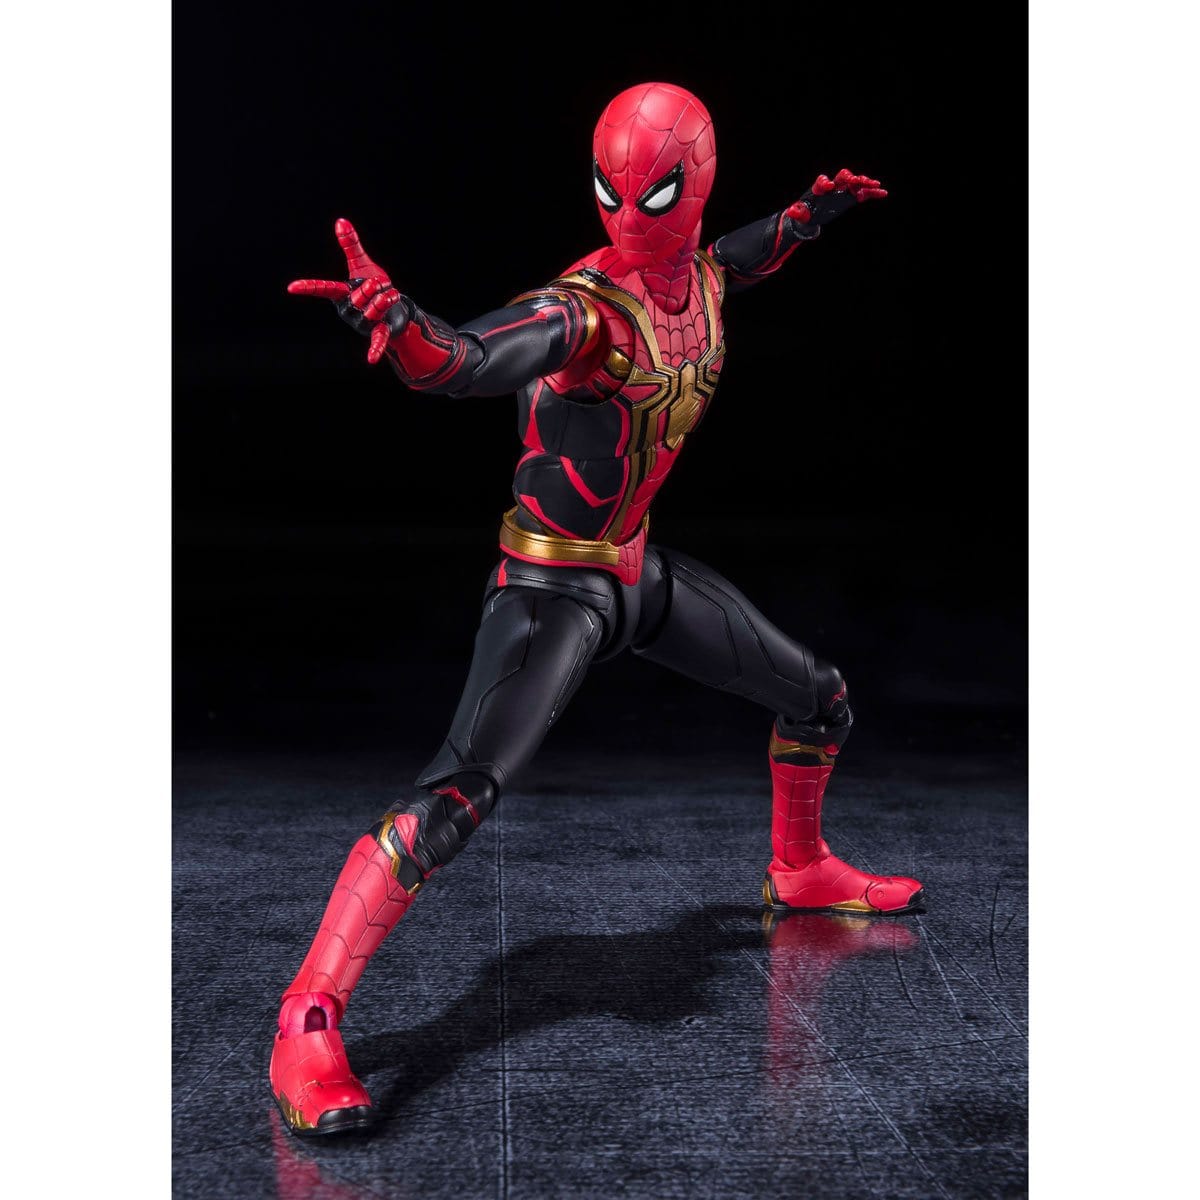 Tamashii Nations S.H.Figuarts Spider-Man: No Way Home Spider-Man Integrated Suit Final Battle Action Figure